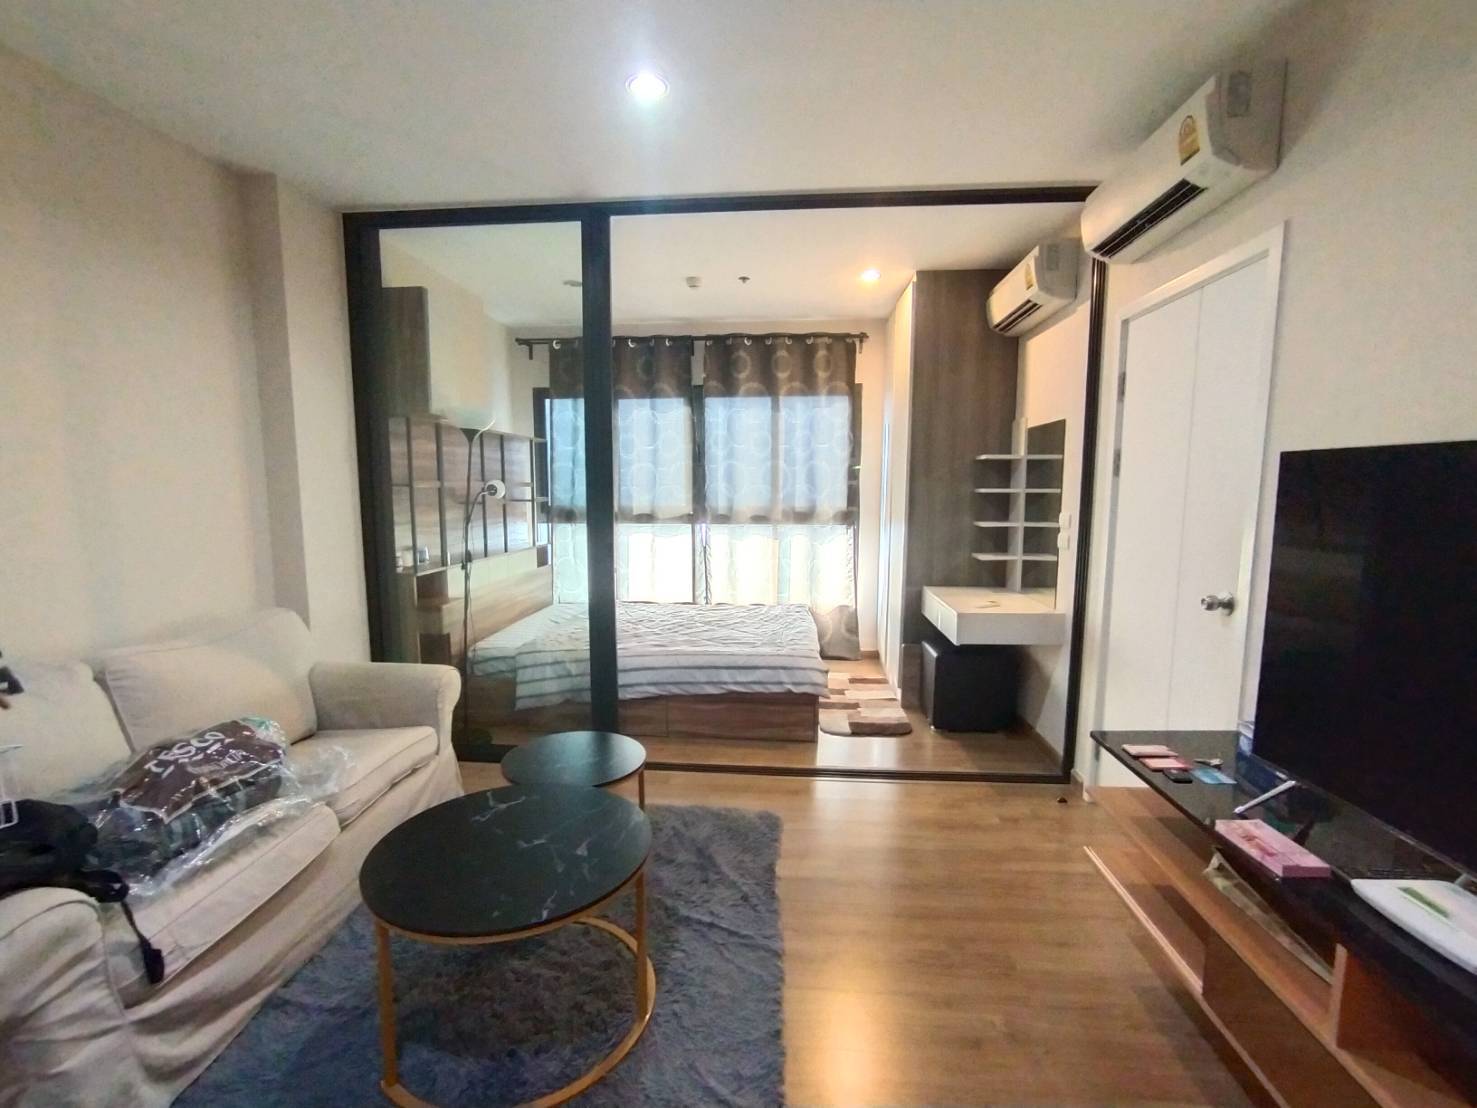 Condo for sale with tenants!!! THE TREE RIO Condo, Bang O, next to the Blue Line Station, Bang O, receives 104,400 baht per year for rent.